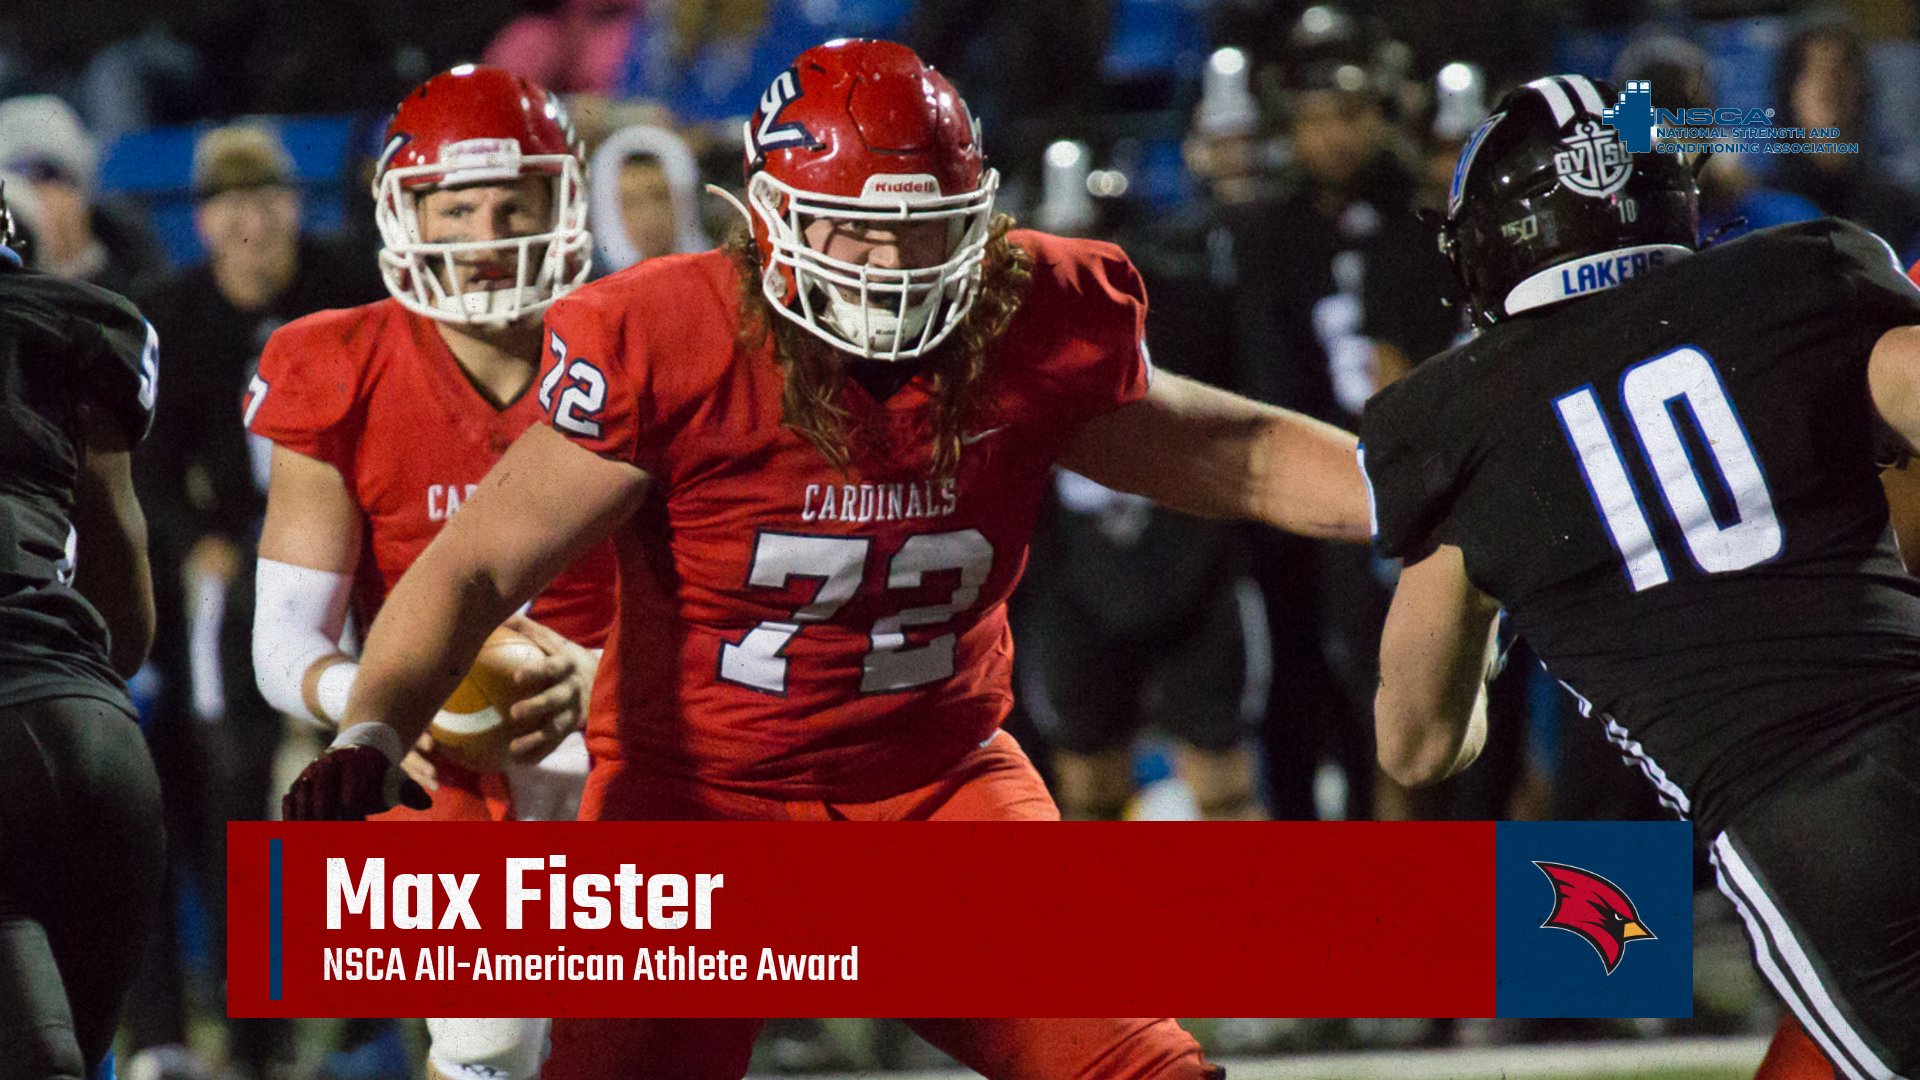 Max Fister Receives the NSCA 2020 All-American Athlete Award